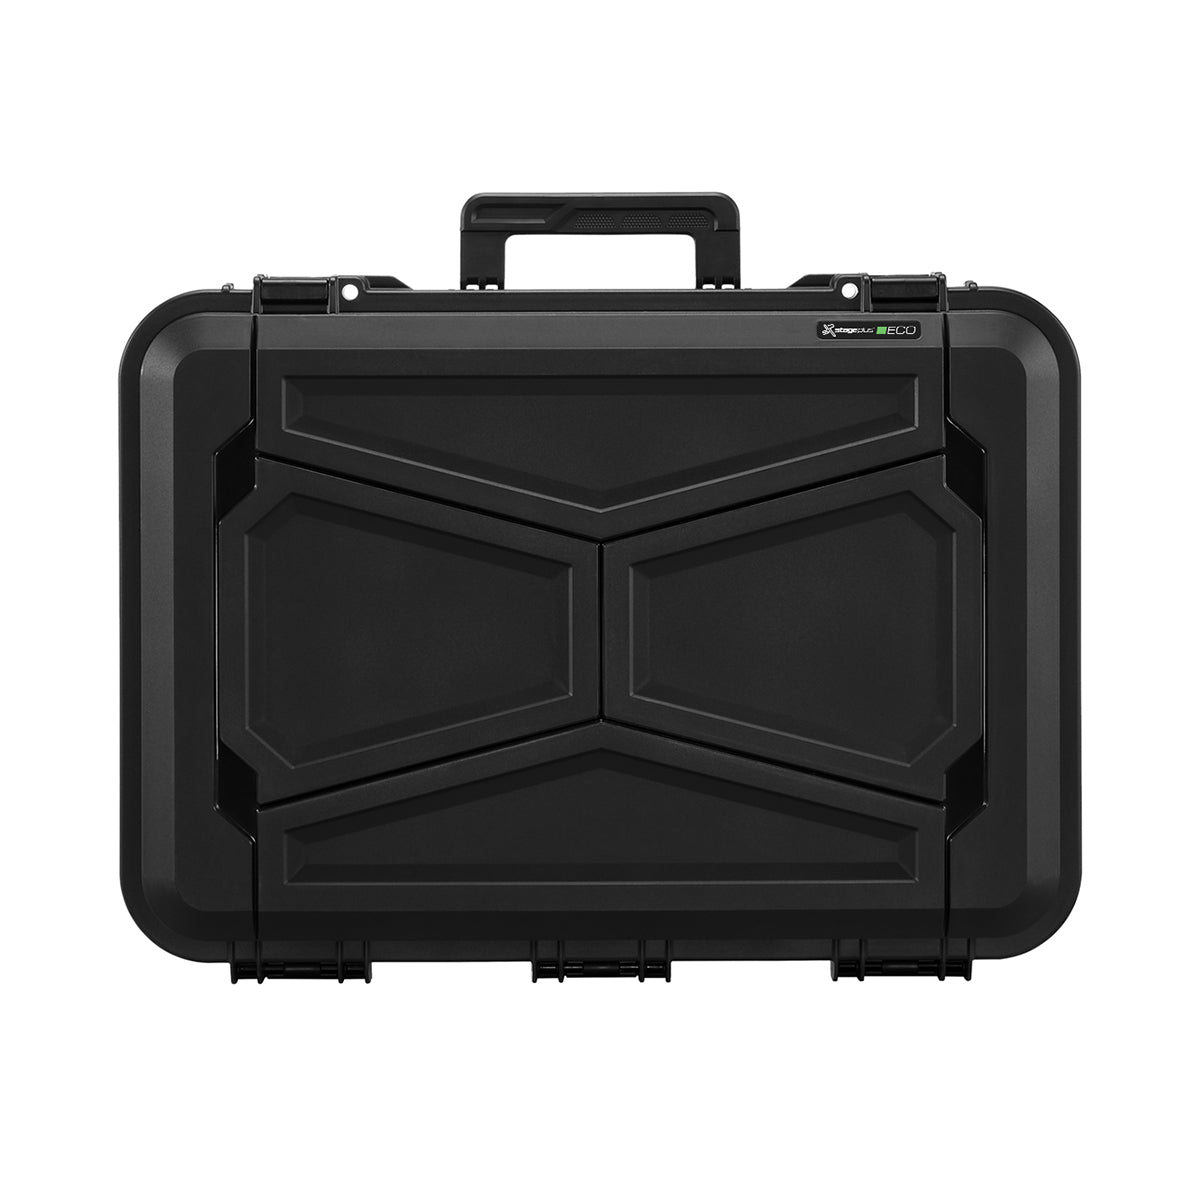 SP ECO 90S Black Carry Case, Cubed Foam, ID: L520xW350xH125mm